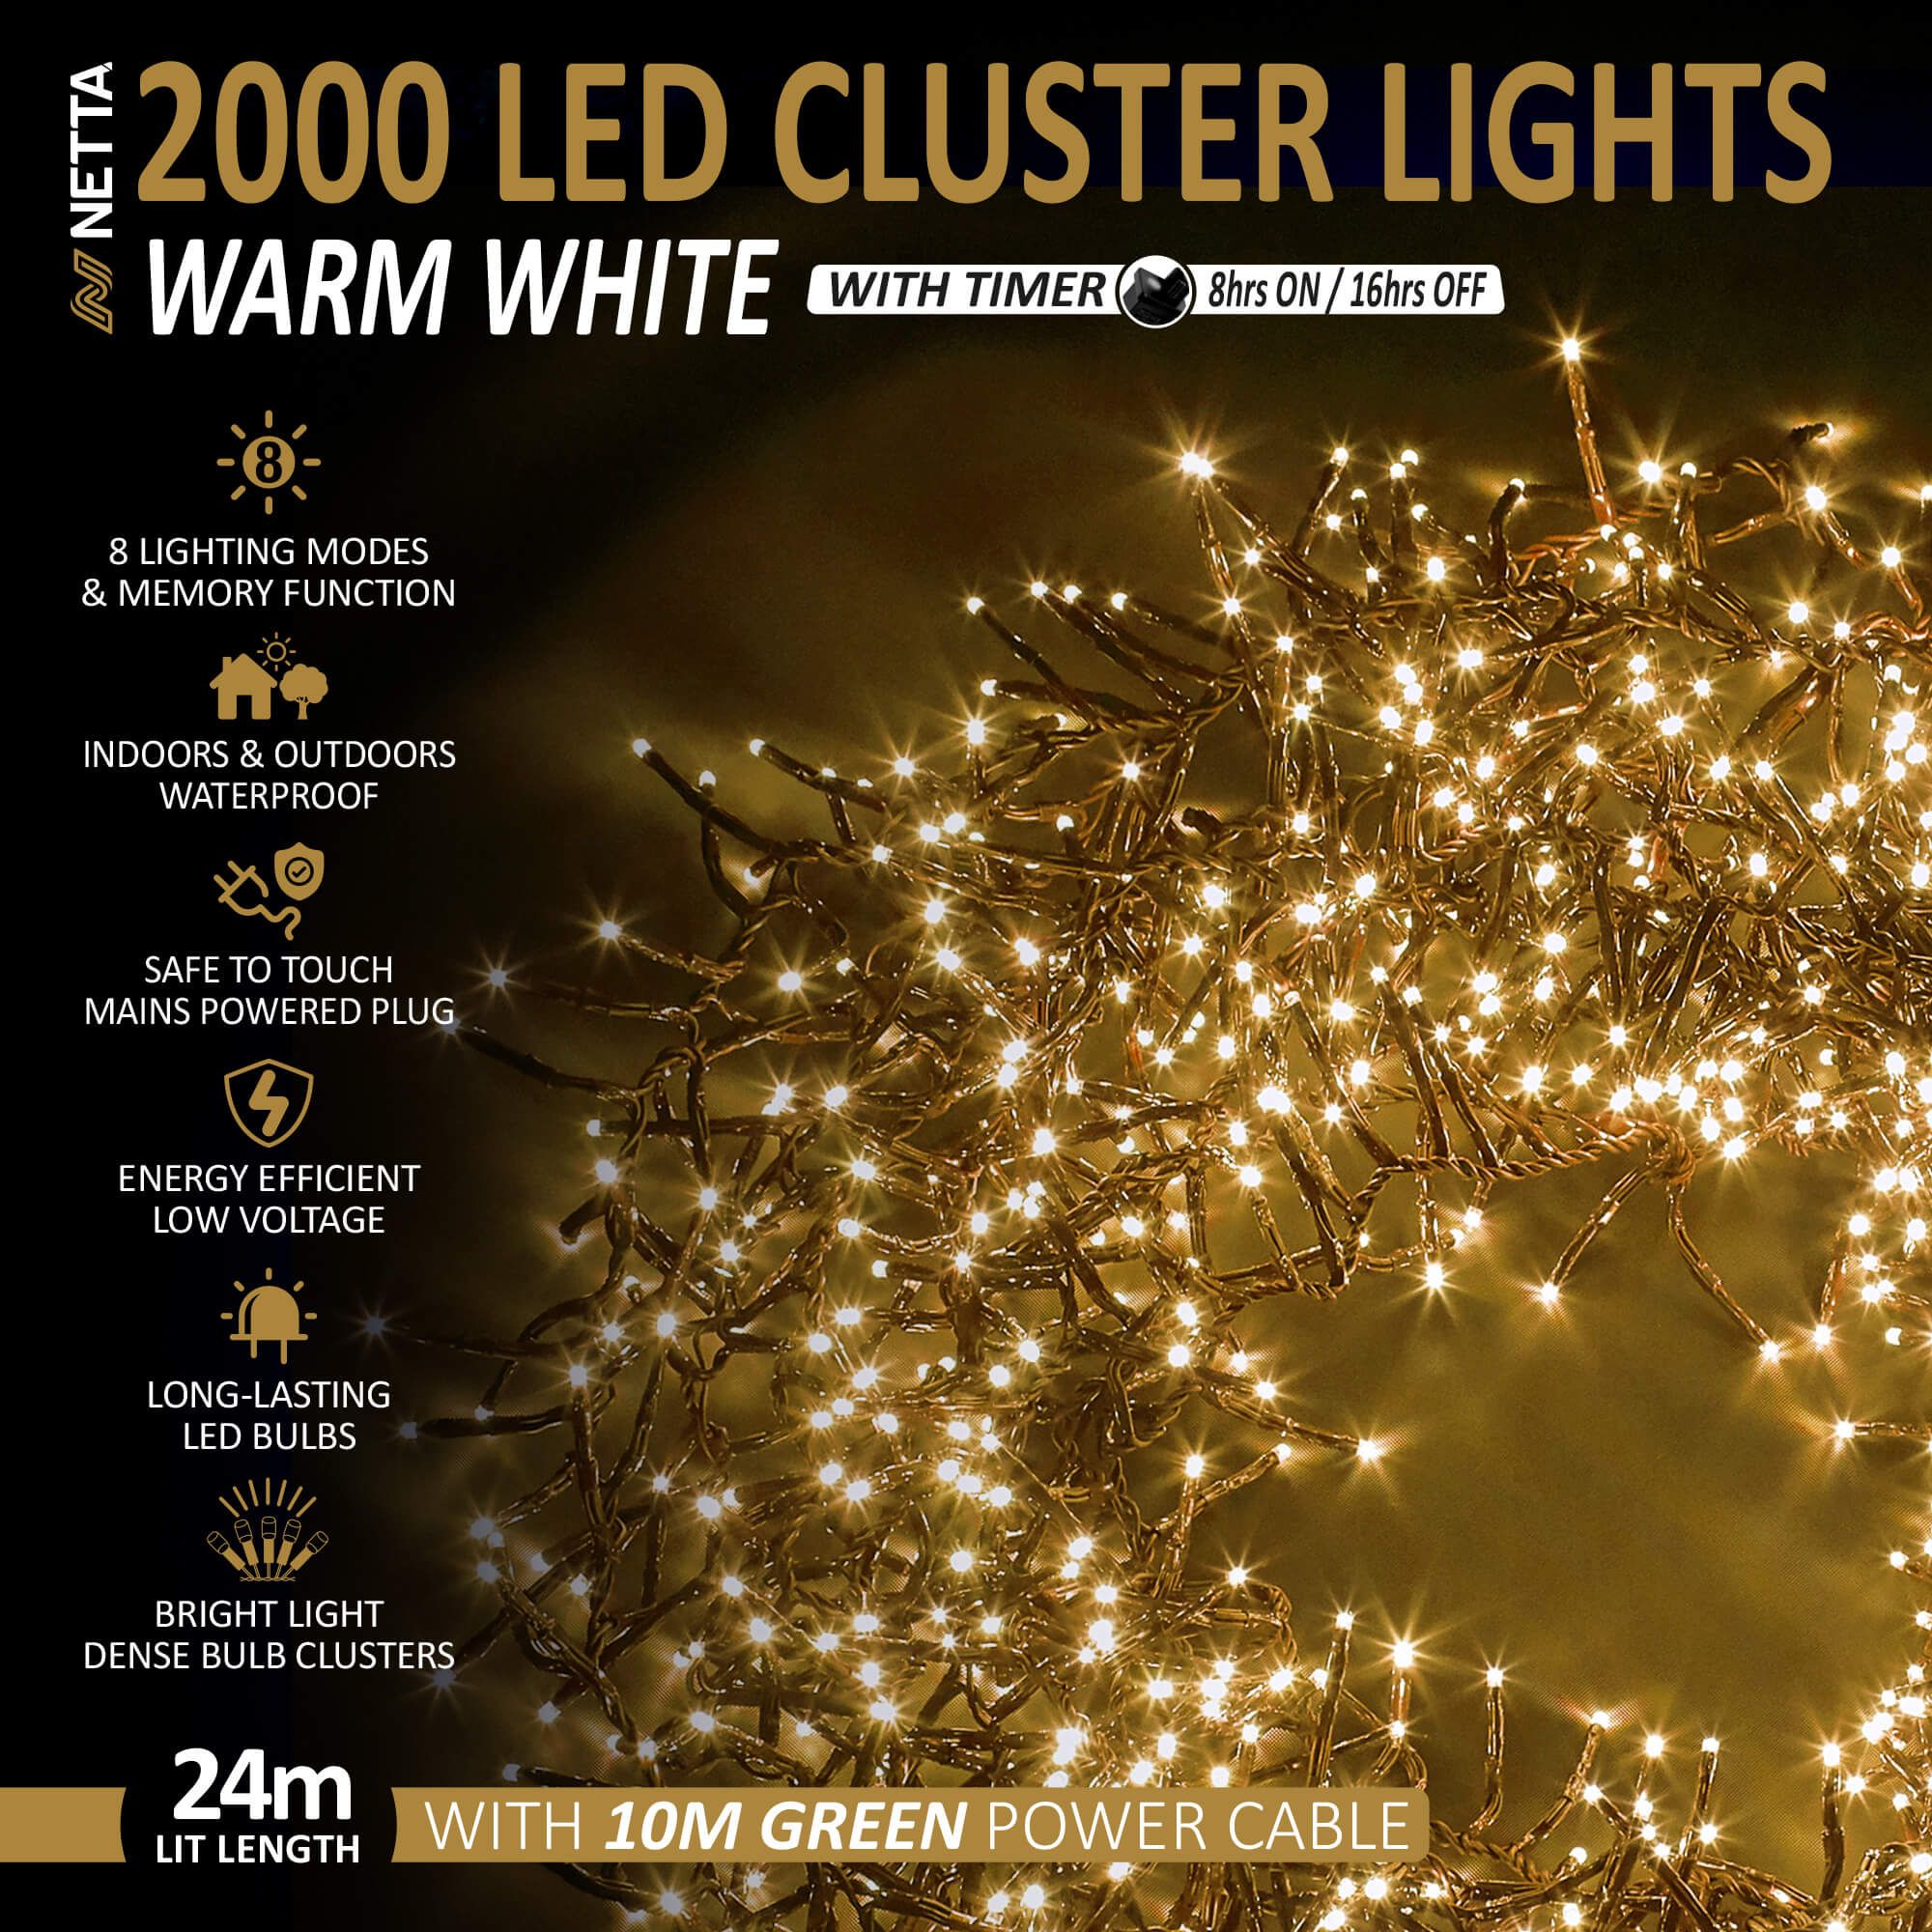 2000 LED 24M Cluster String Lights Outdoor and Indoor Plug In - Warm White